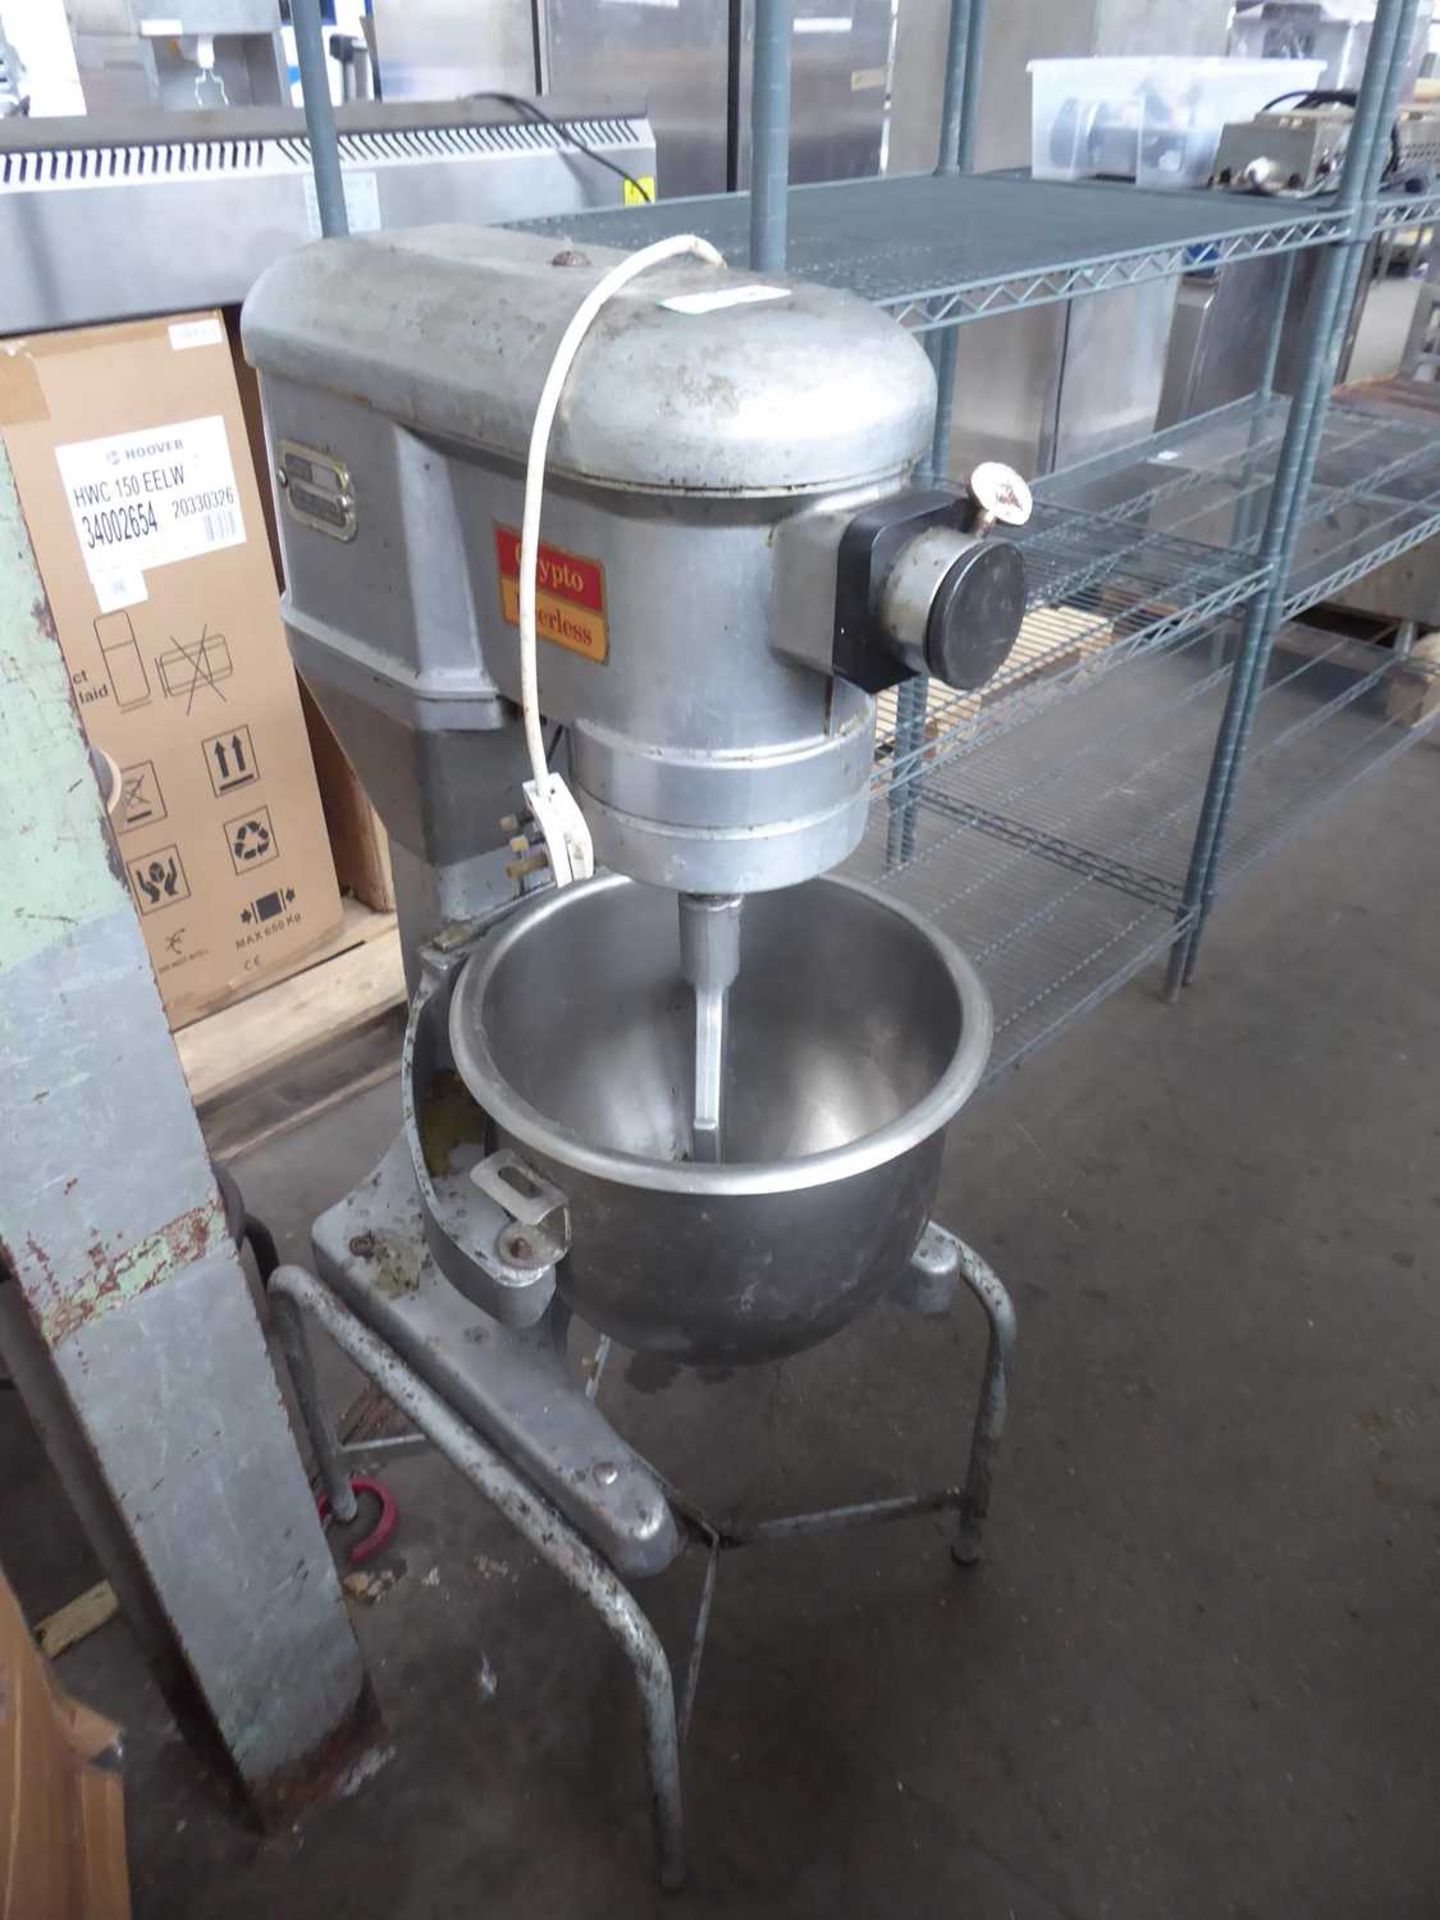 Crypto peerless 20 qt mixer with bowl and attachment